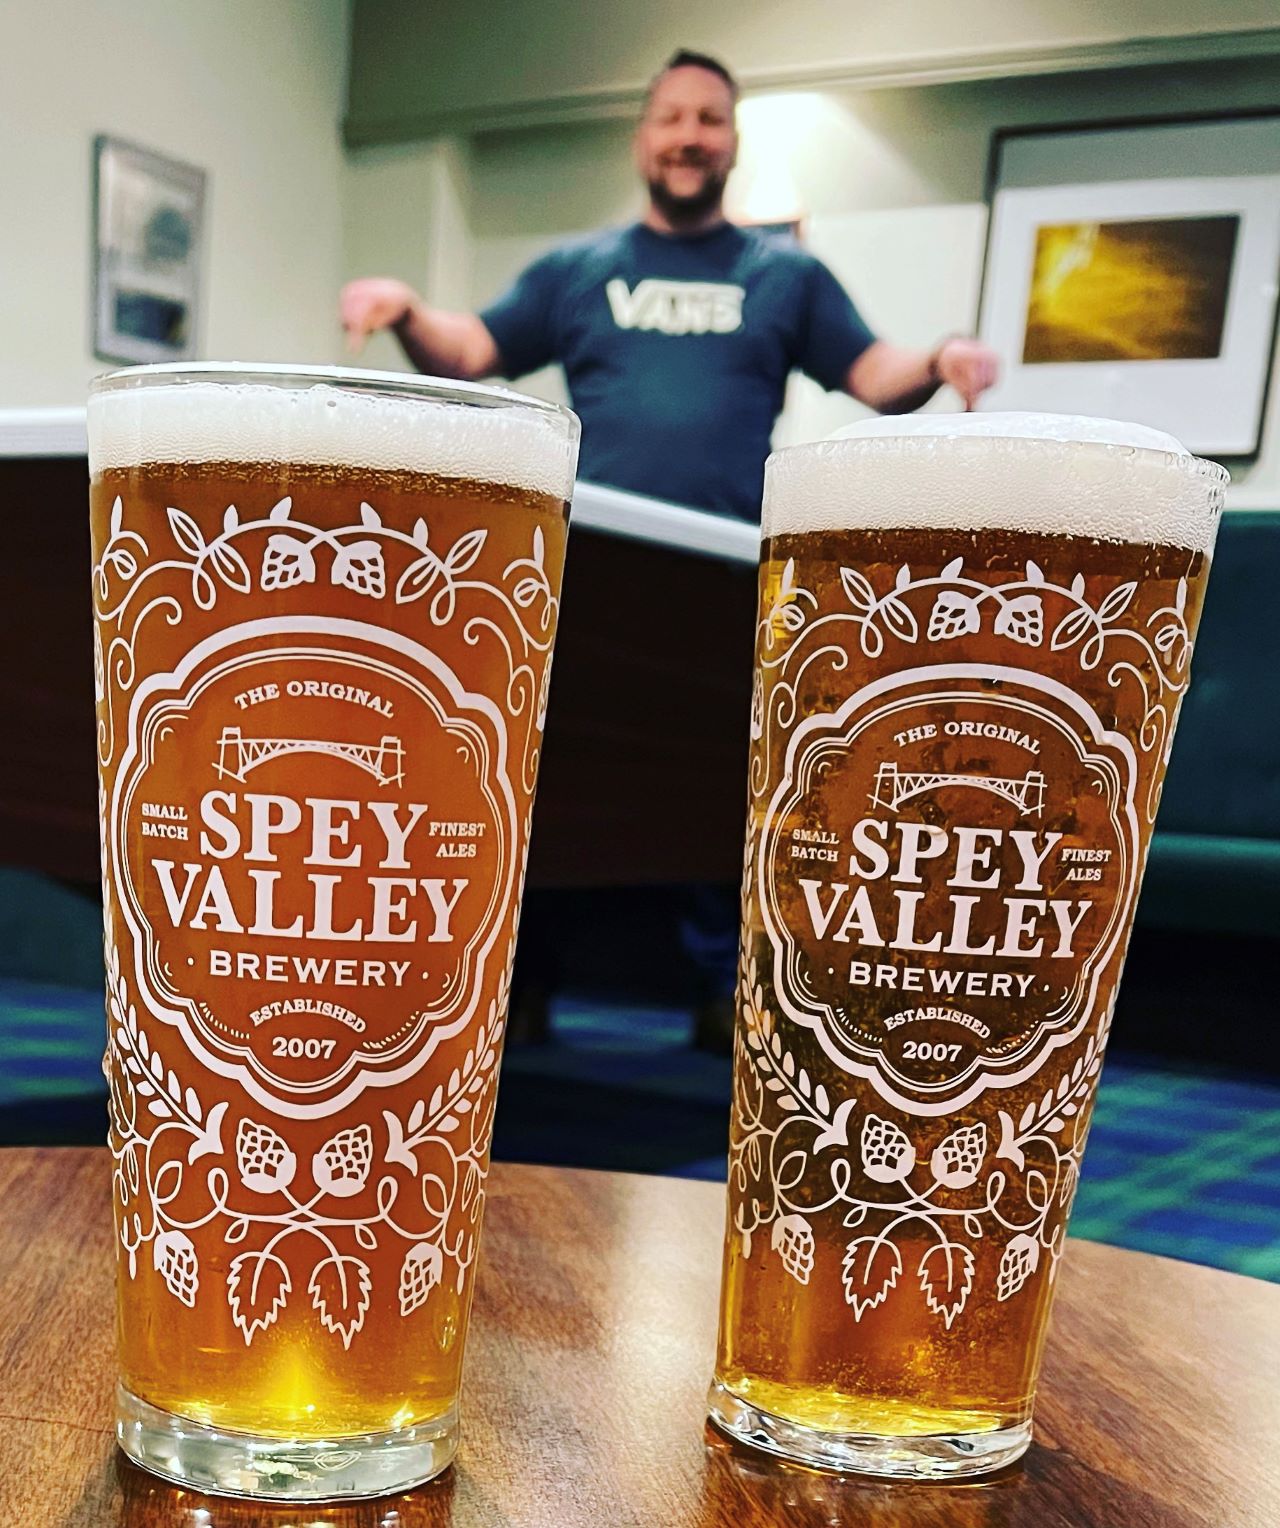 Find out more about the offers available at Spey Valley Brewery